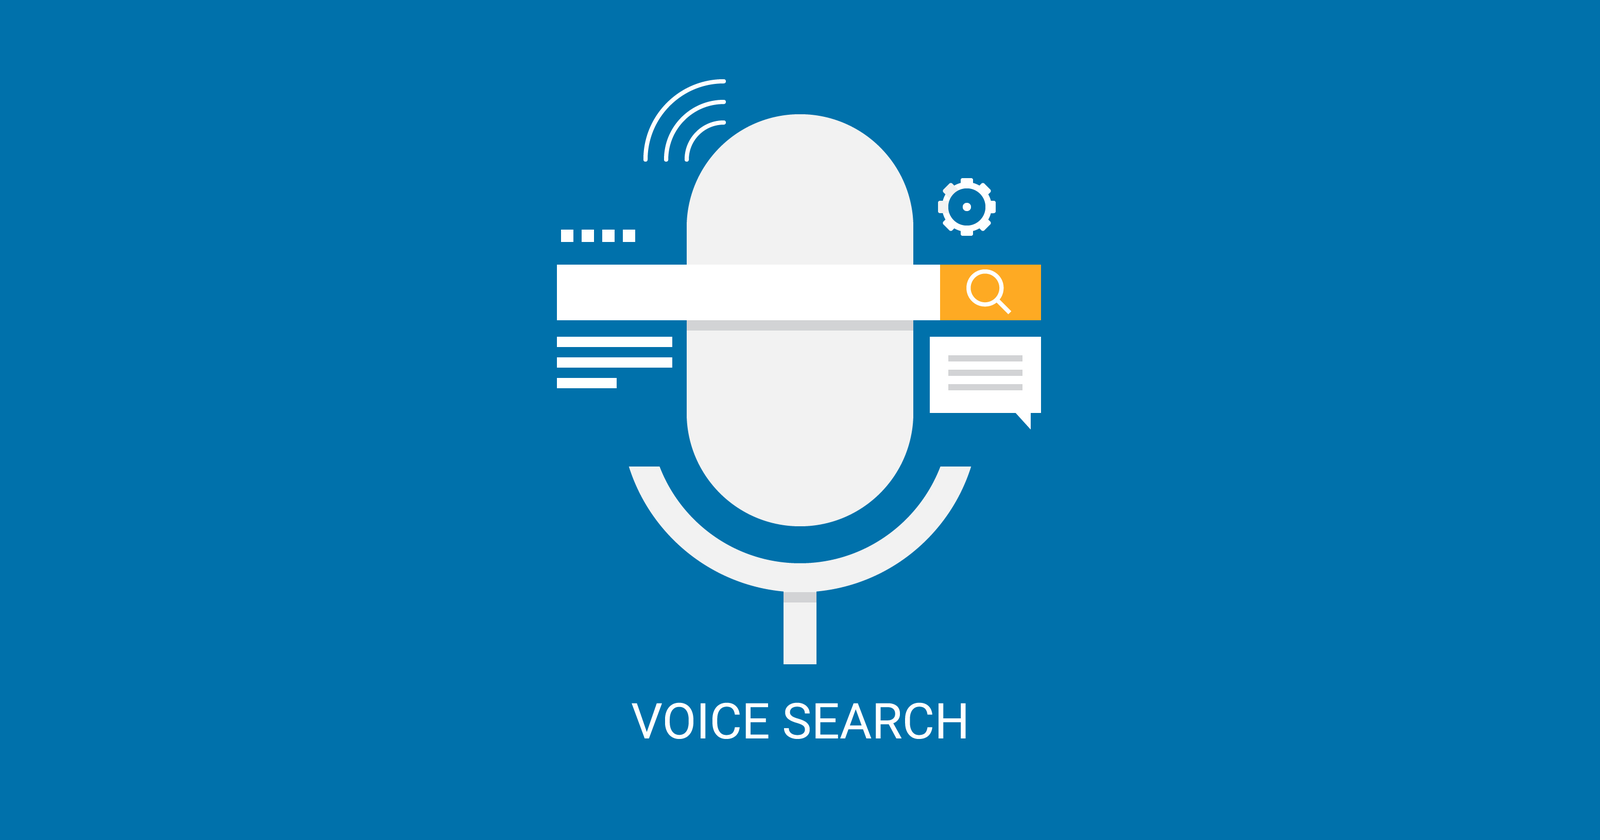 how-to-optimize-for-voice-search-6-best-seo-strategies-5f5a57587b851.png